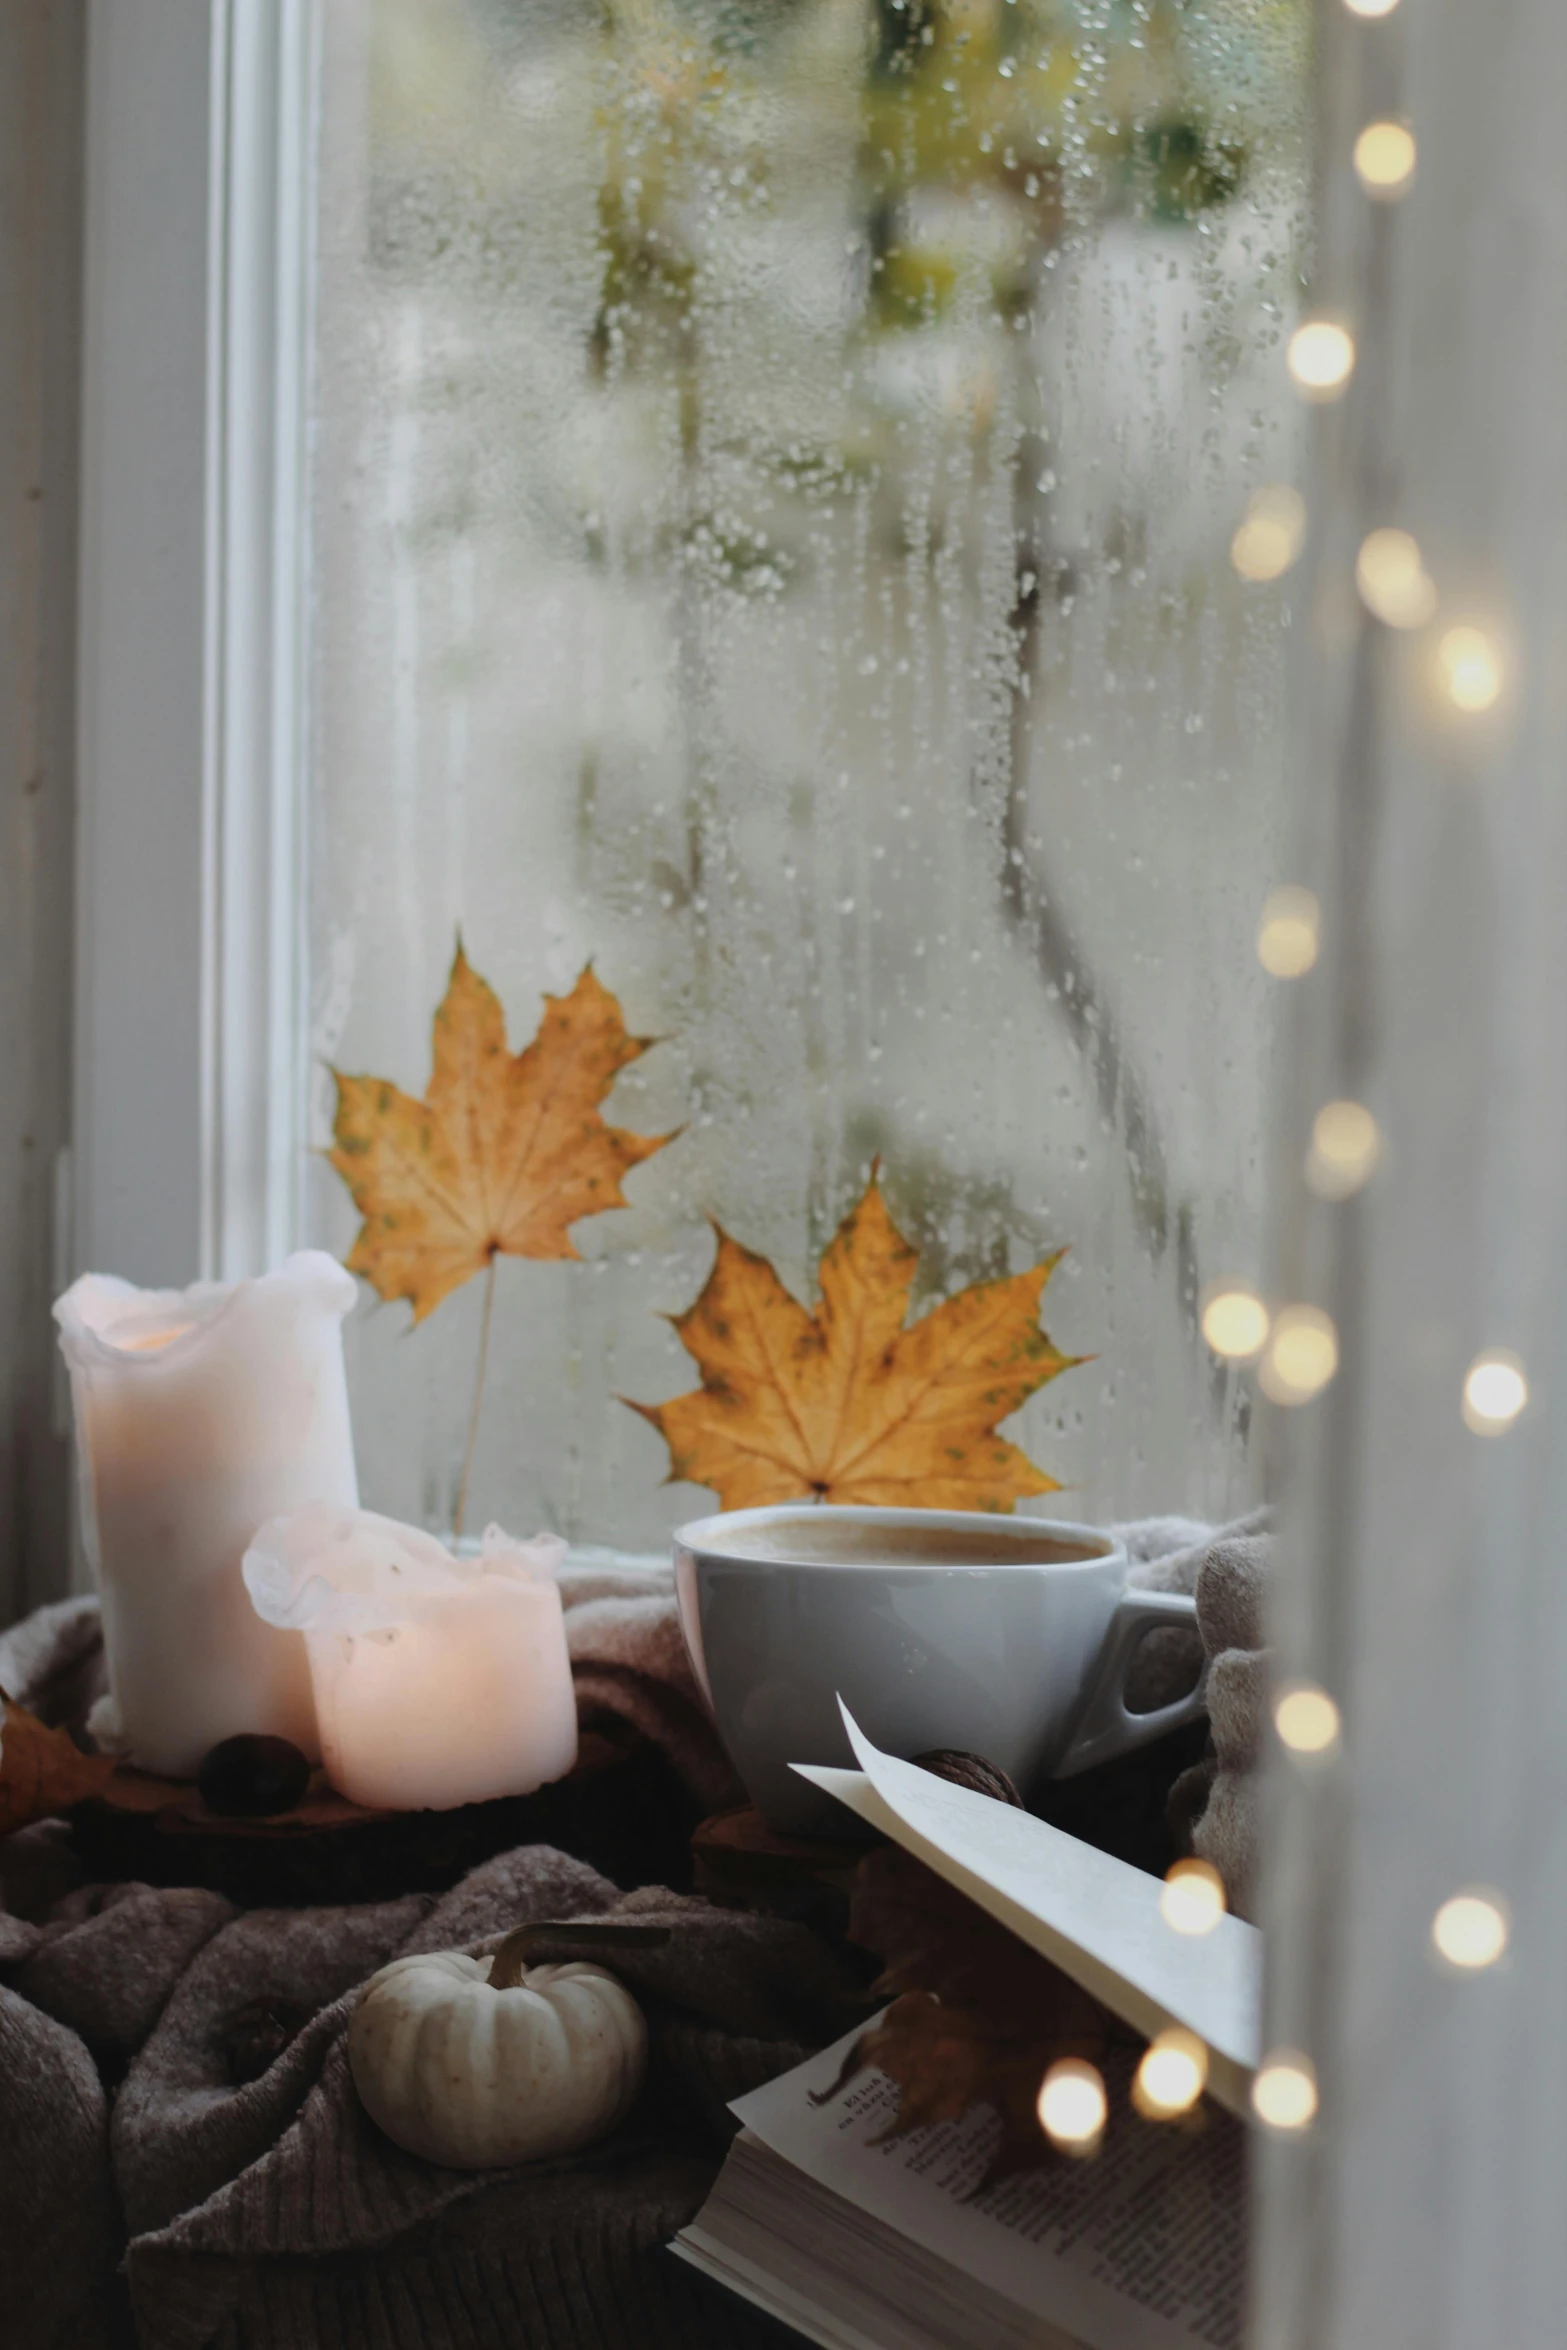 autumn leaves, candles, a tealight candle, and a cup sit in front of the window